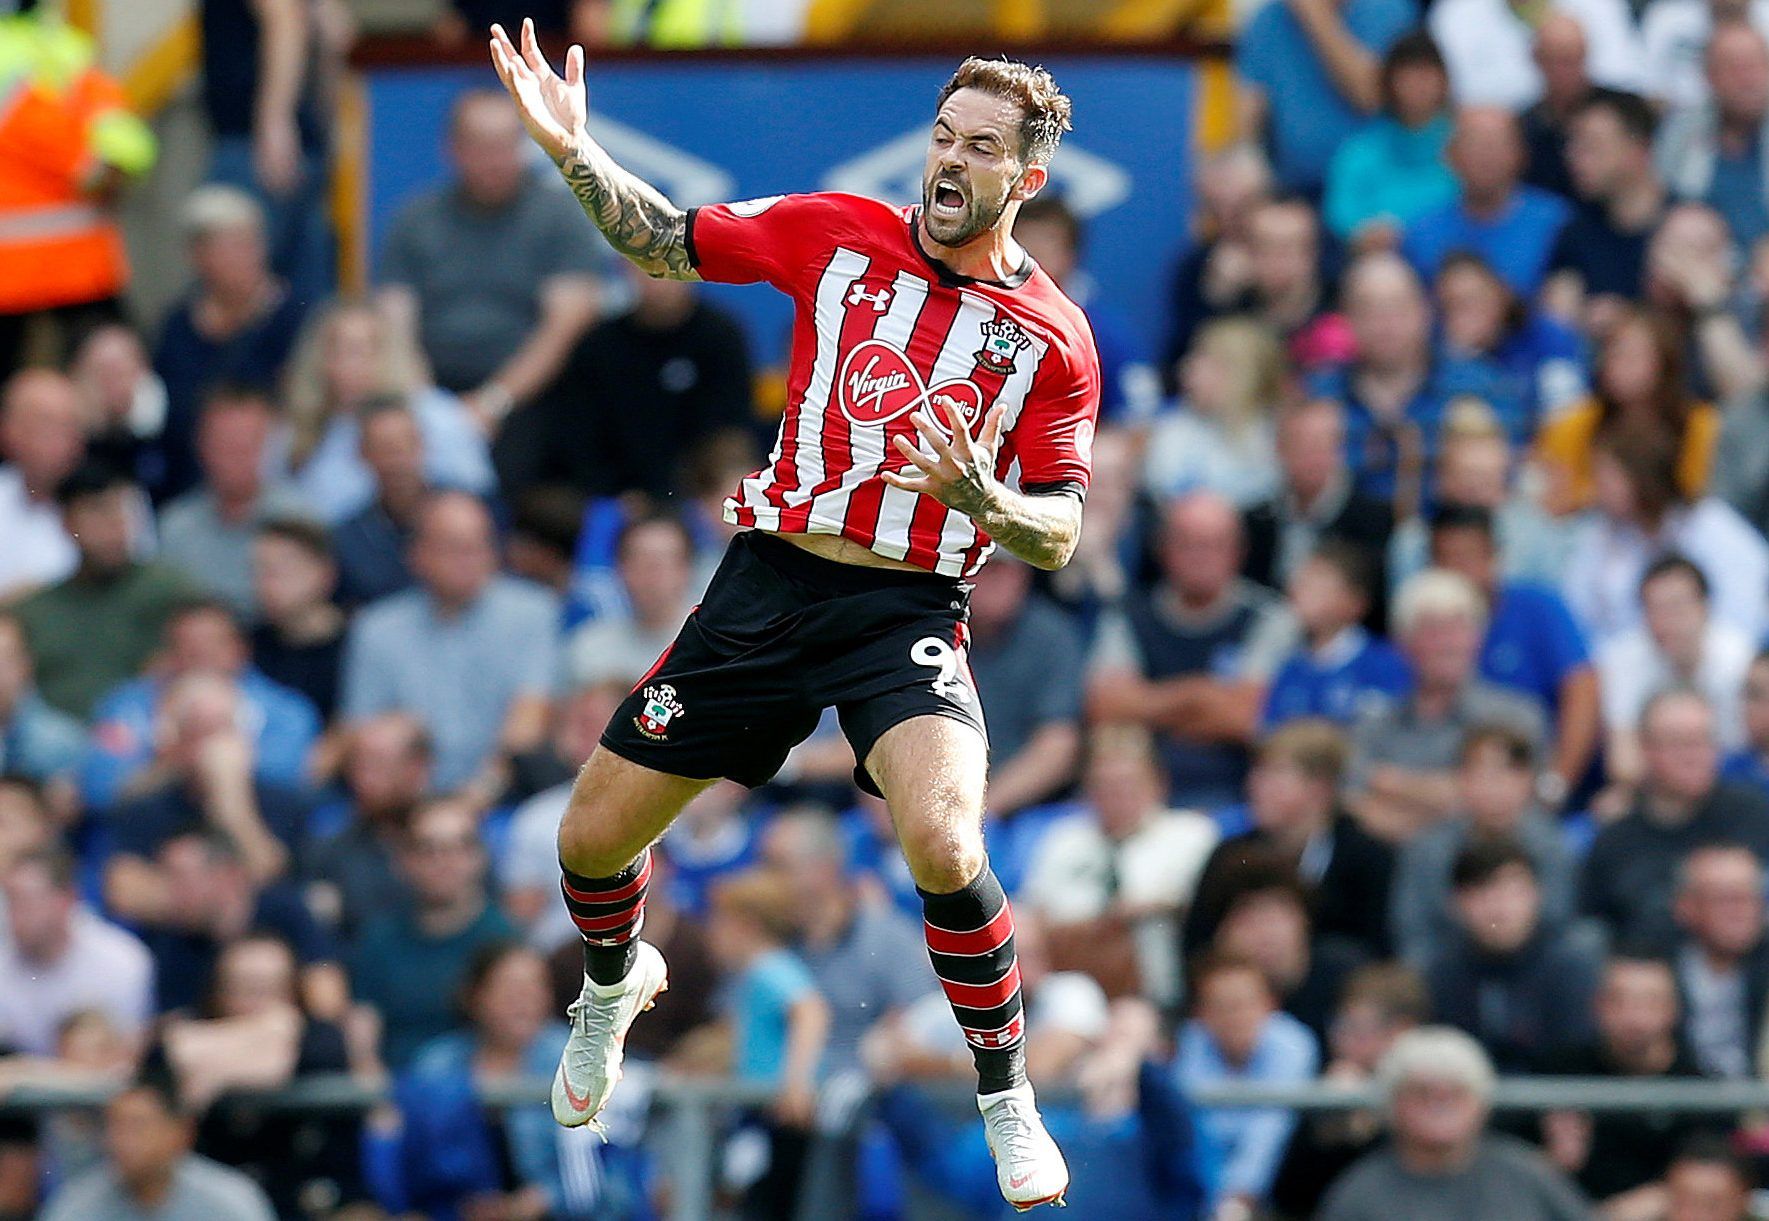 Soccer Football - Premier League - Everton v Southampton - Goodison Park, Liverpool, Britain - August 18, 2018   Southampton's Danny Ings celebrates scoring their first goal    Action Images via Reuters/Ed Sykes    EDITORIAL USE ONLY. No use with unauthorized audio, video, data, fixture lists, club/league logos or 